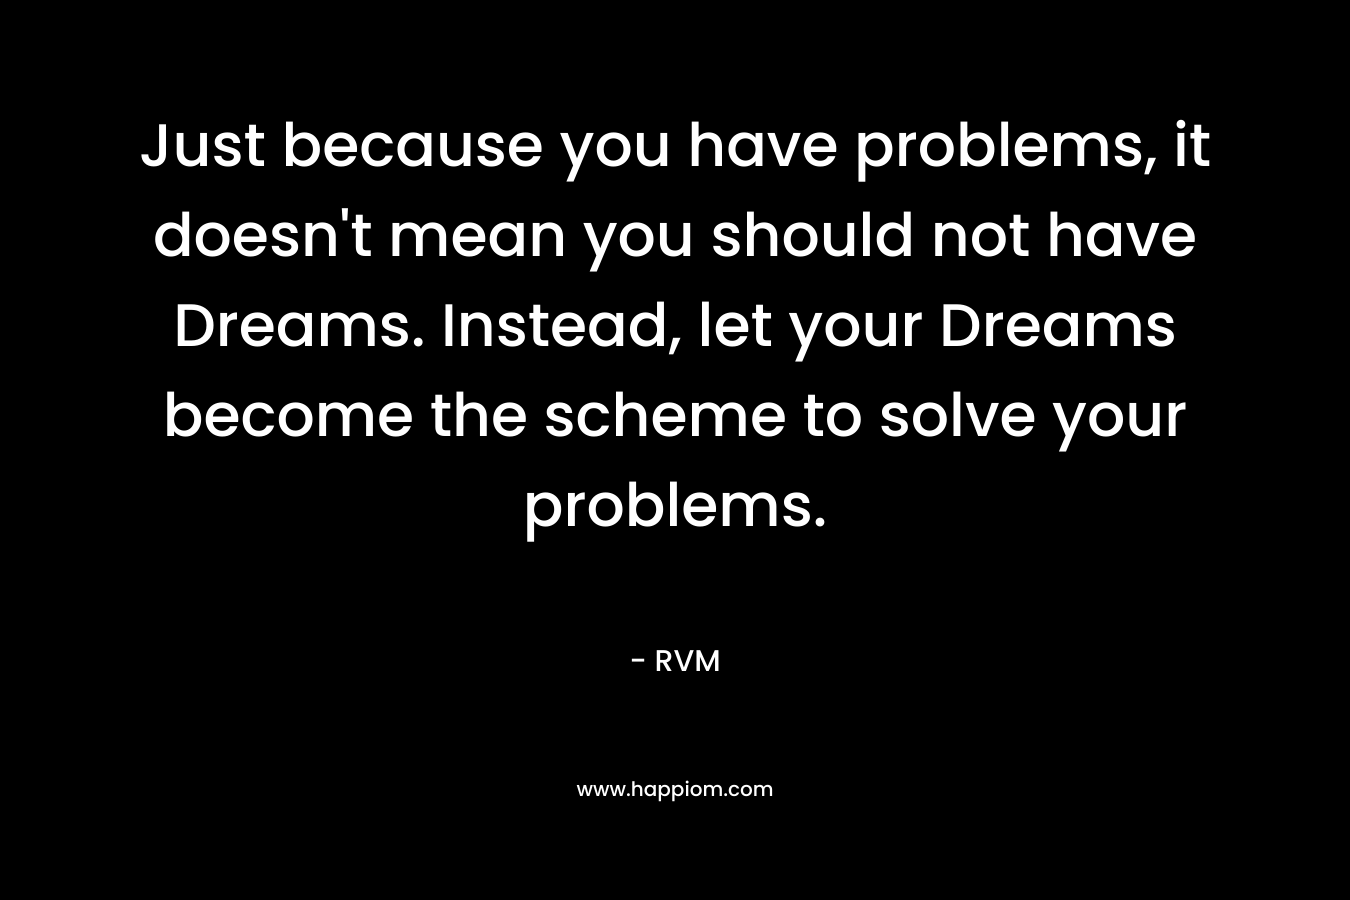 Just because you have problems, it doesn't mean you should not have Dreams. Instead, let your Dreams become the scheme to solve your problems.